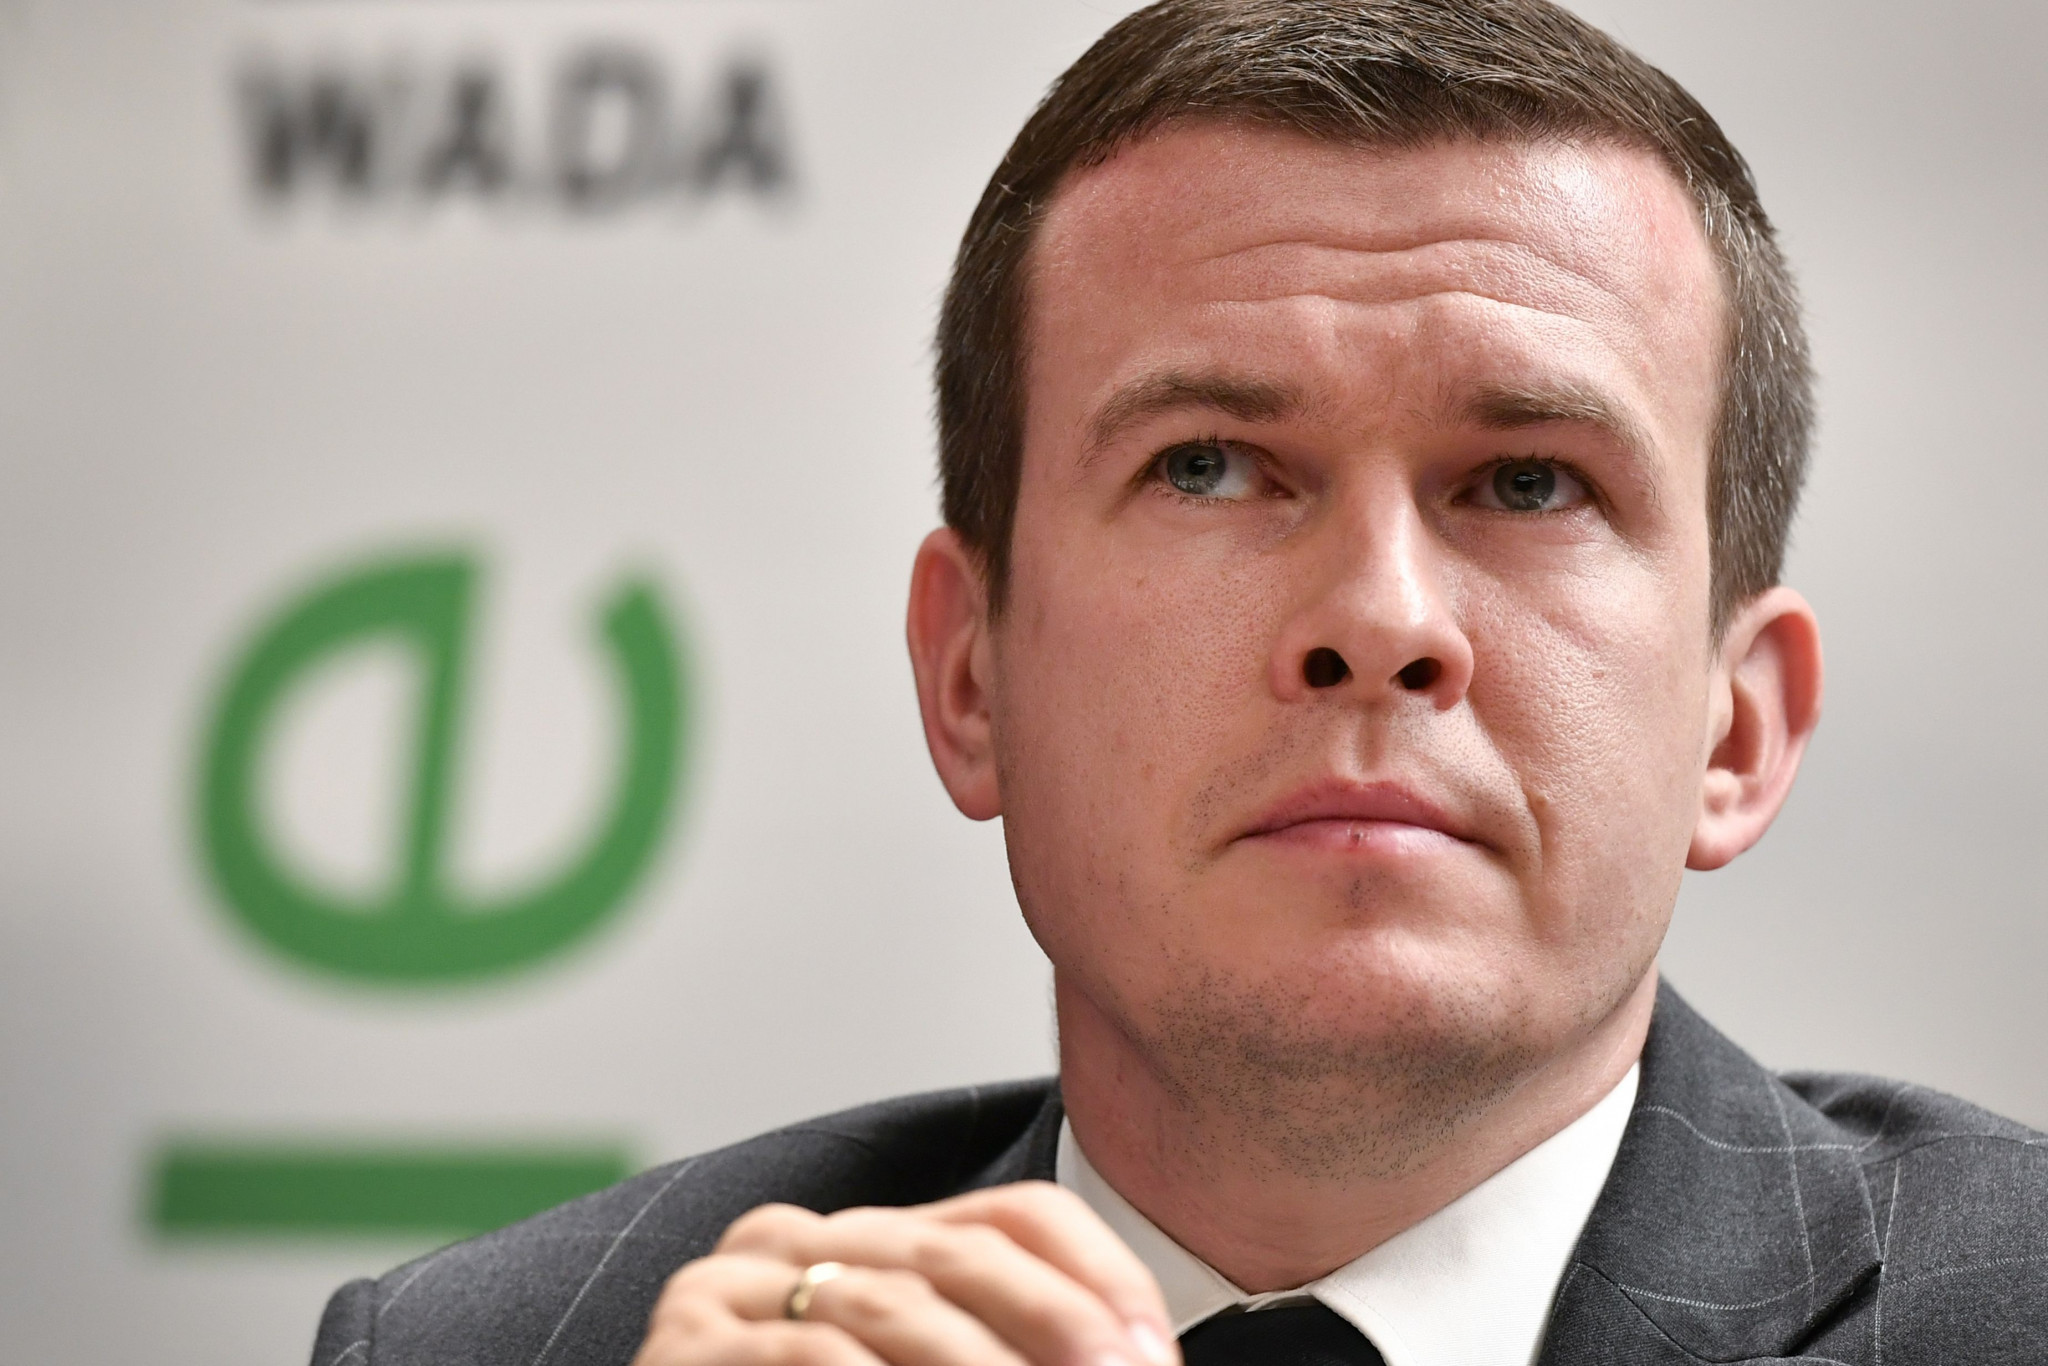 WADA keen to work collaboratively with United States on ongoing governance reforms